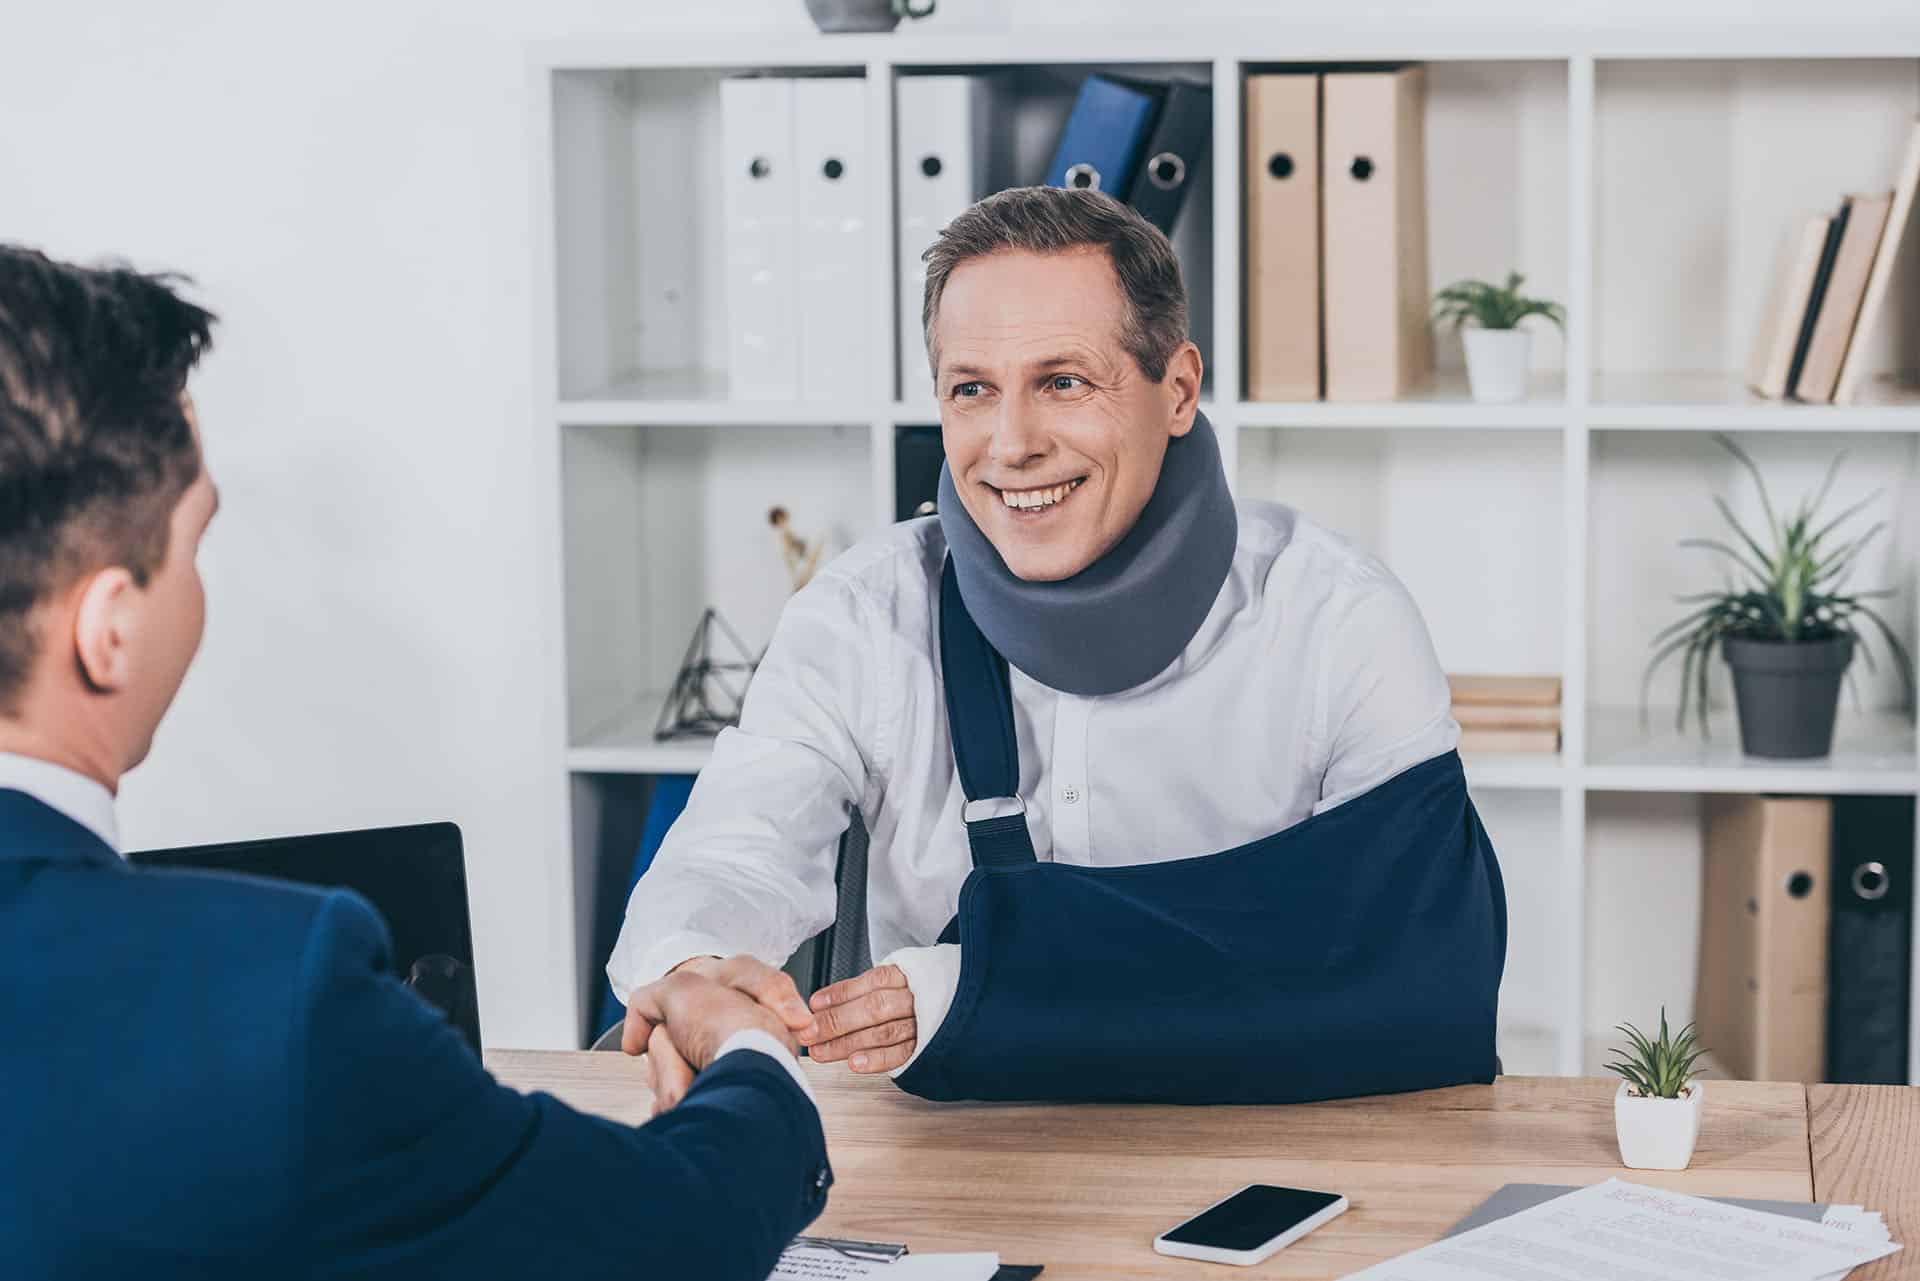 Worker in neck brace with brokenarm and businessman in blue jacket shaking hands over table in office